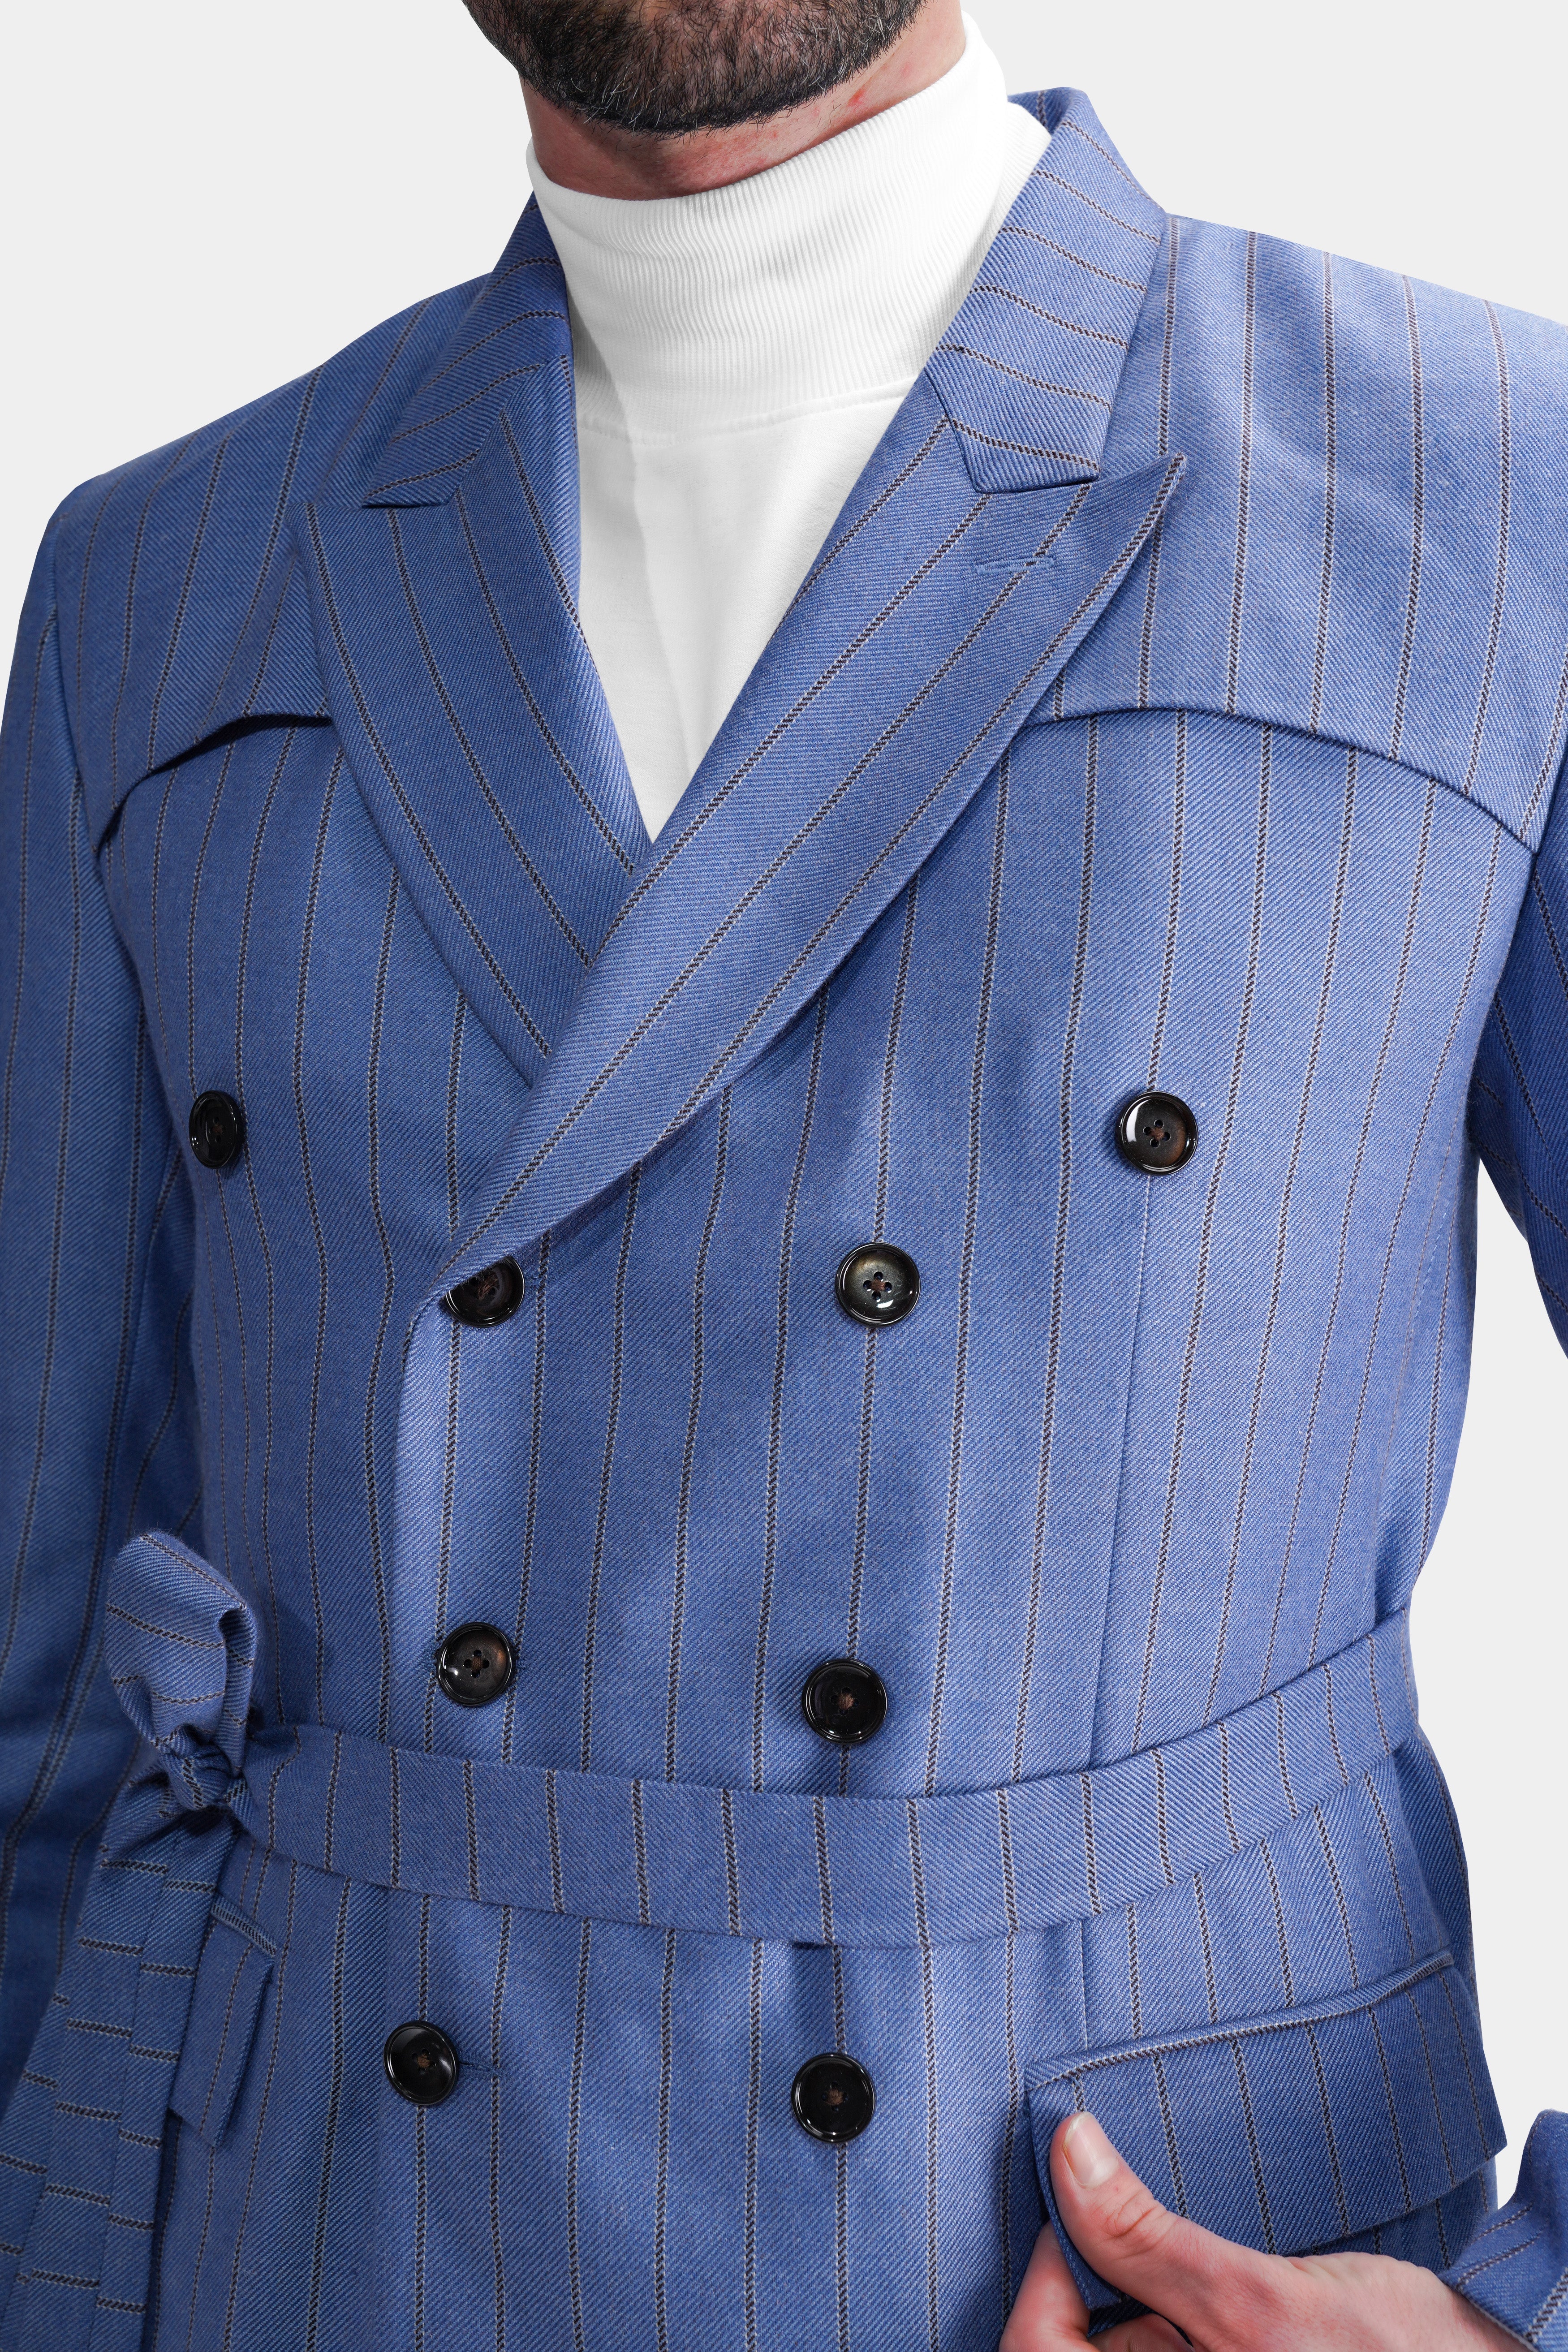 Chetwode Blue and Iroko Brown Striped Wool Rich Designer Blazer BL2769-DB-D35-36, BL2769-DB-D35-38, BL2769-DB-D35-40, BL2769-DB-D35-42, BL2769-DB-D35-44, BL2769-DB-D35-46, BL2769-DB-D35-48, BL2769-DB-D35-50, BL2769-DB-D35-52, BL2769-DB-D35-54, BL2769-DB-D35-56, BL2769-DB-D35-58, BL2769-DB-D35-60